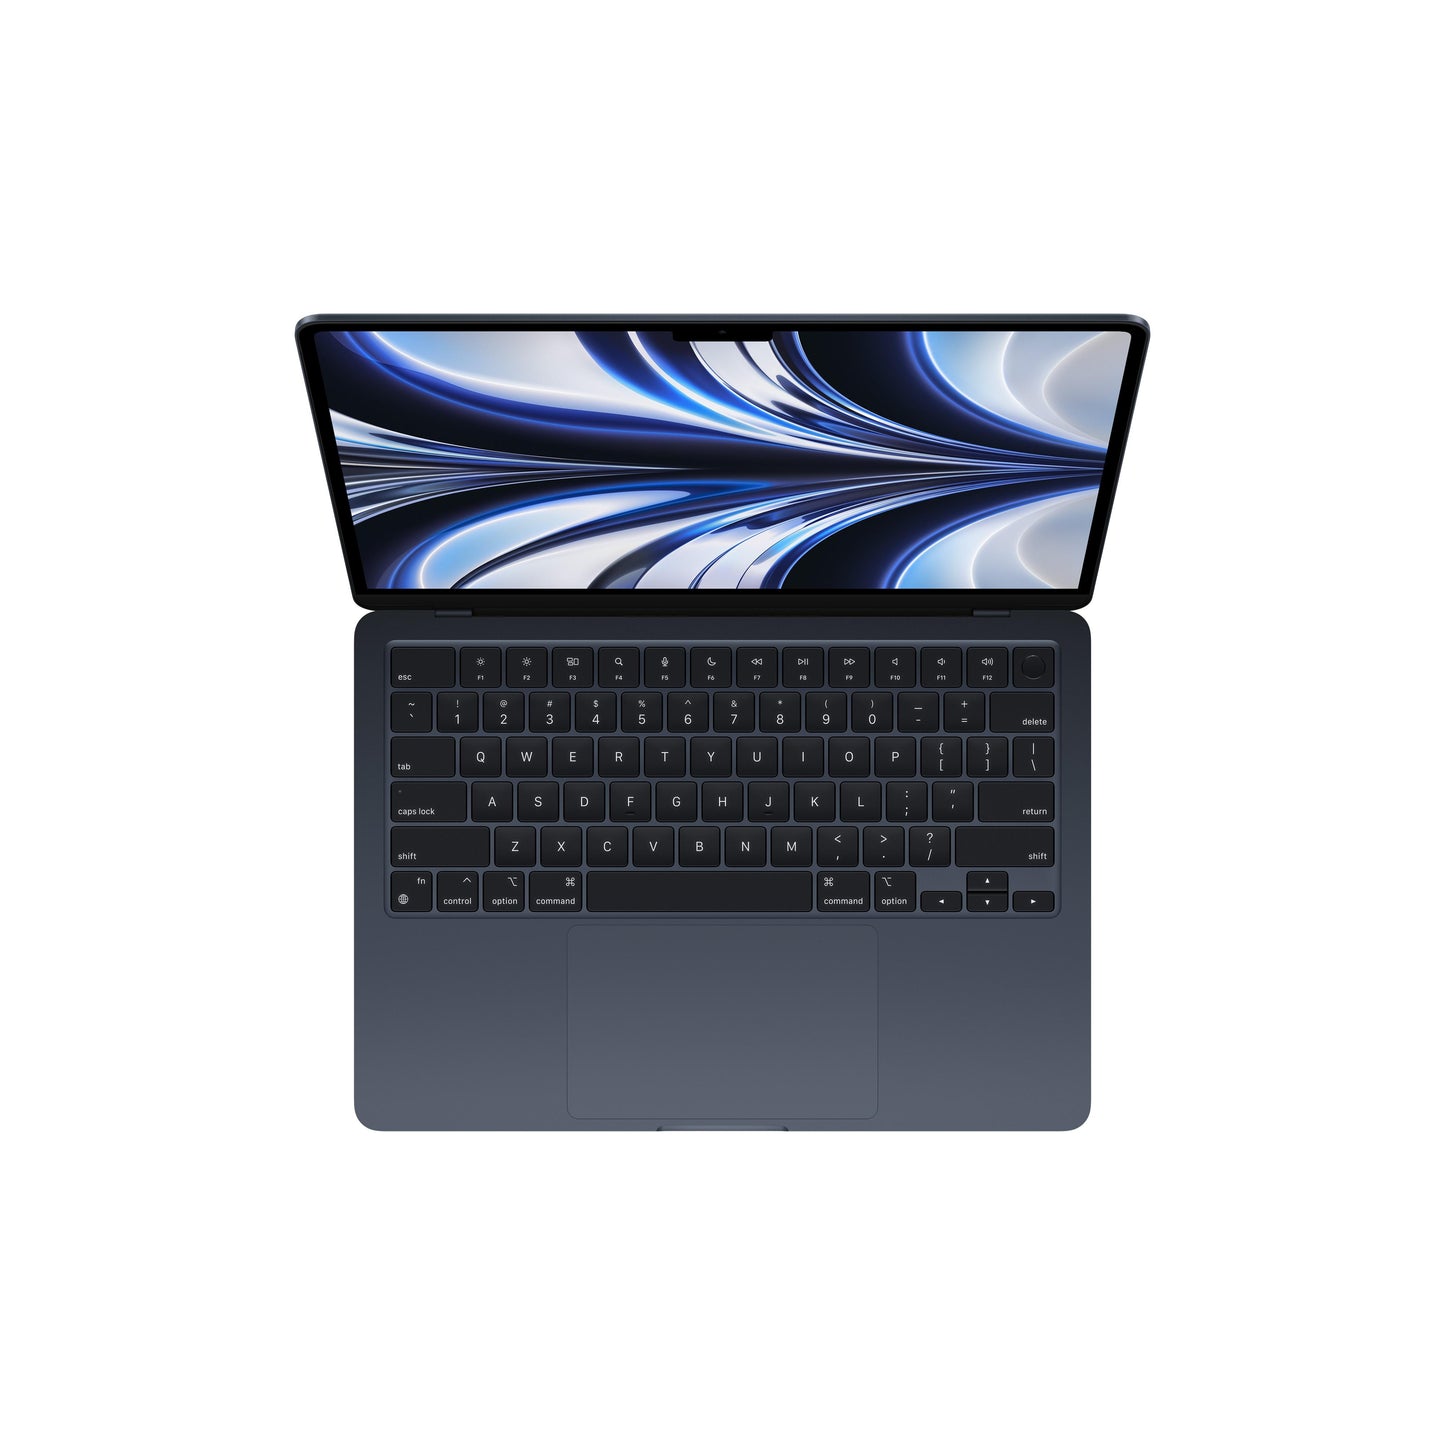 13-inch MacBook Air: Apple M2 chip with 8_core CPU and 10_core GPU, 512GB SSD - Midnight